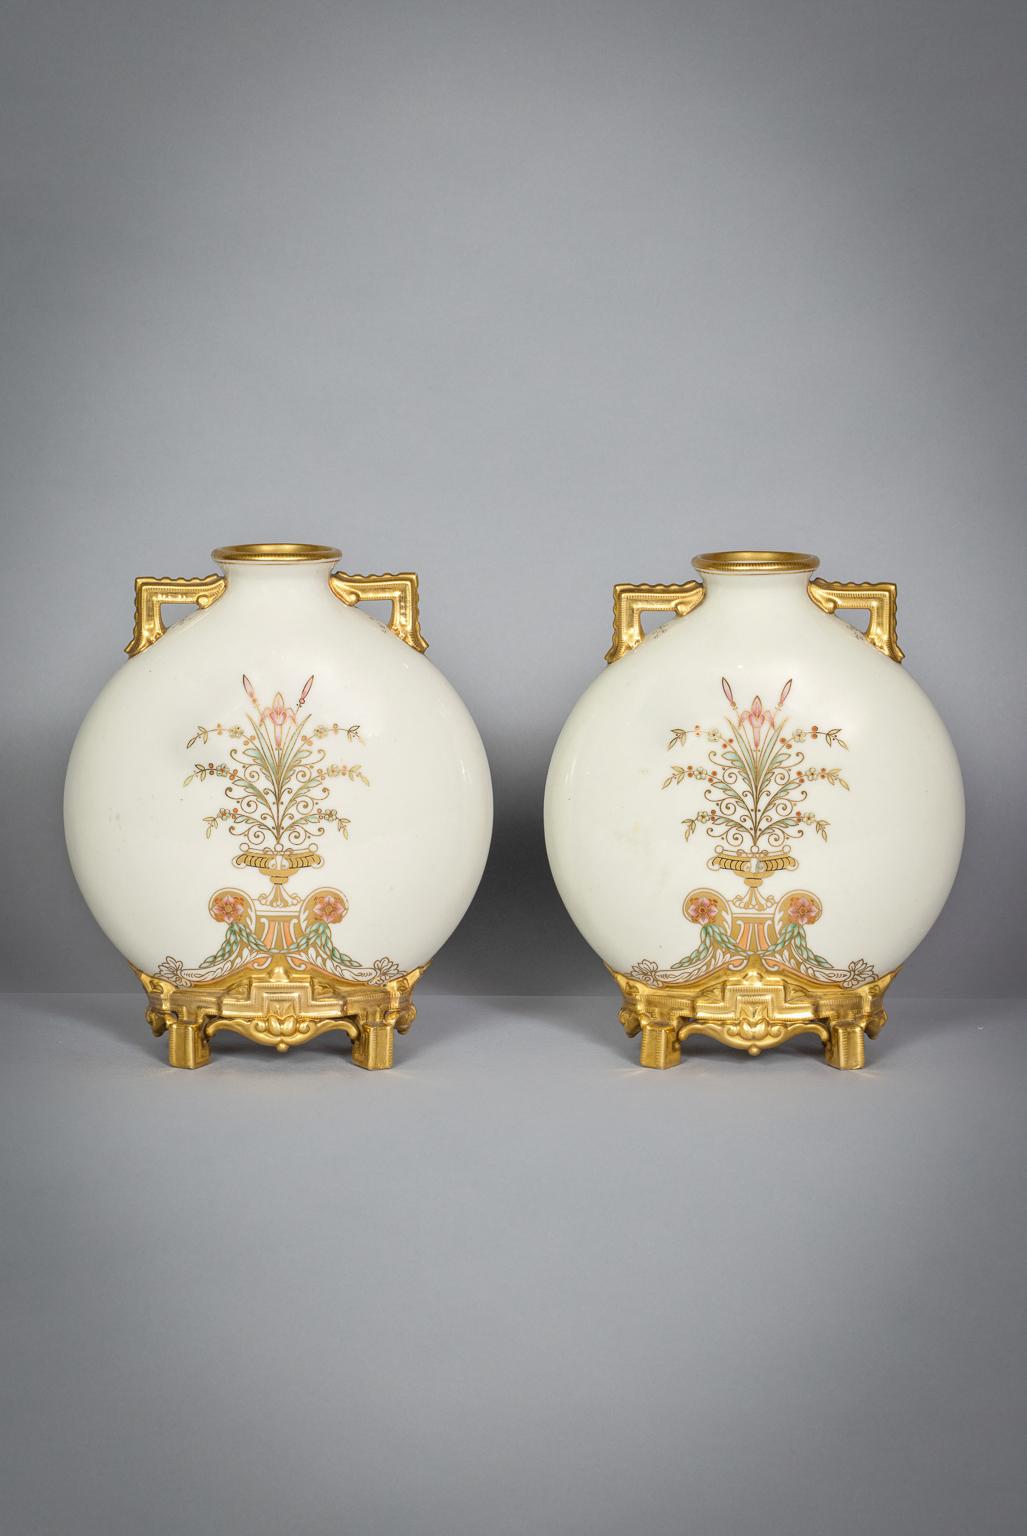 English Pair of Rare Royal Worcester Pate-Sur-Pate Vases, circa 1890 For Sale